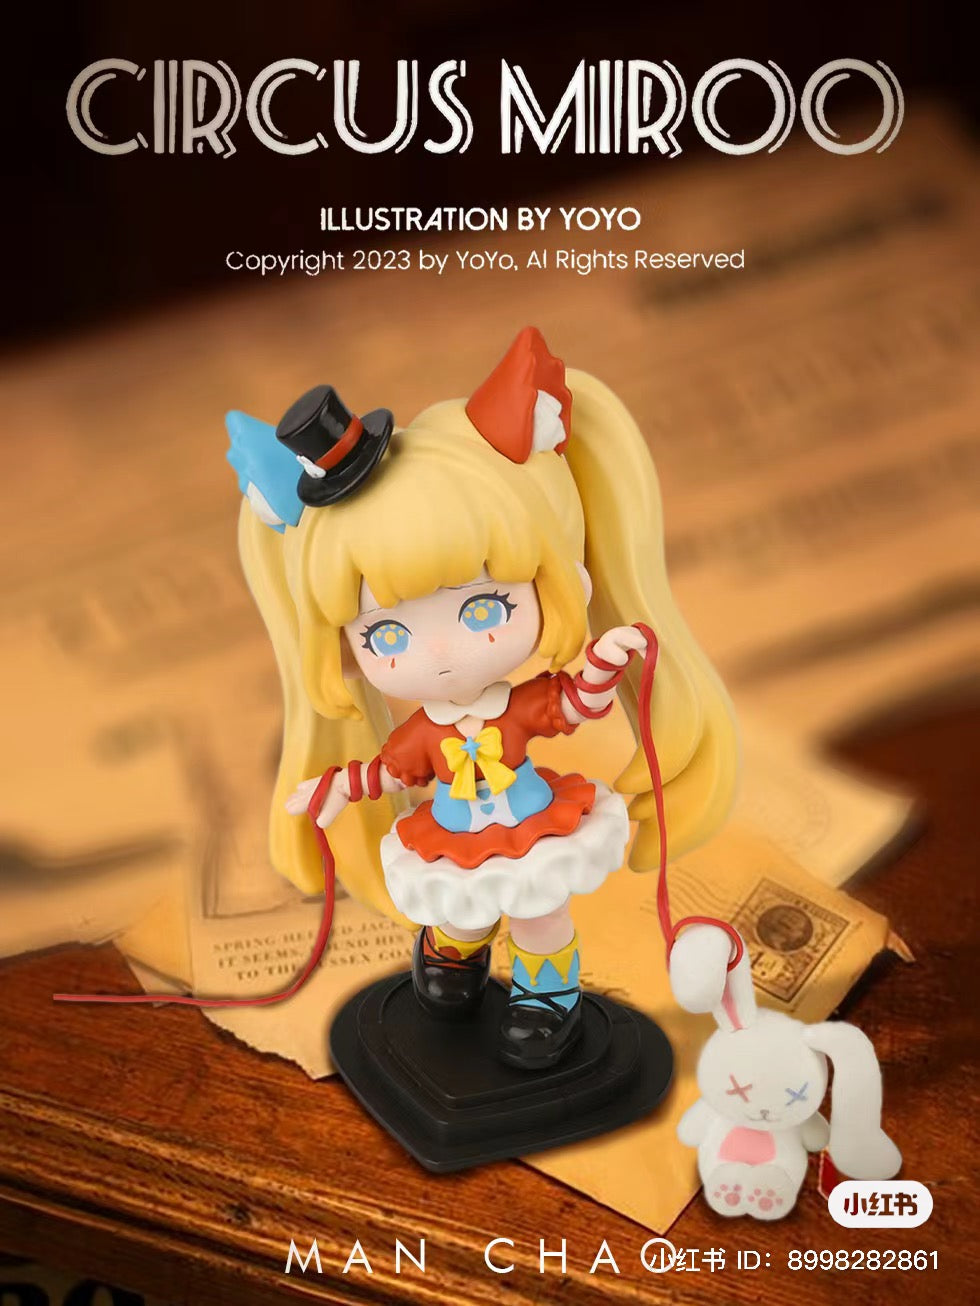 A blind box toy figurine of a girl from MIROO Circus Carnival series by Strangecat Toys. Preorder now for May 2024. Contains 8 regular designs and 1 secret.